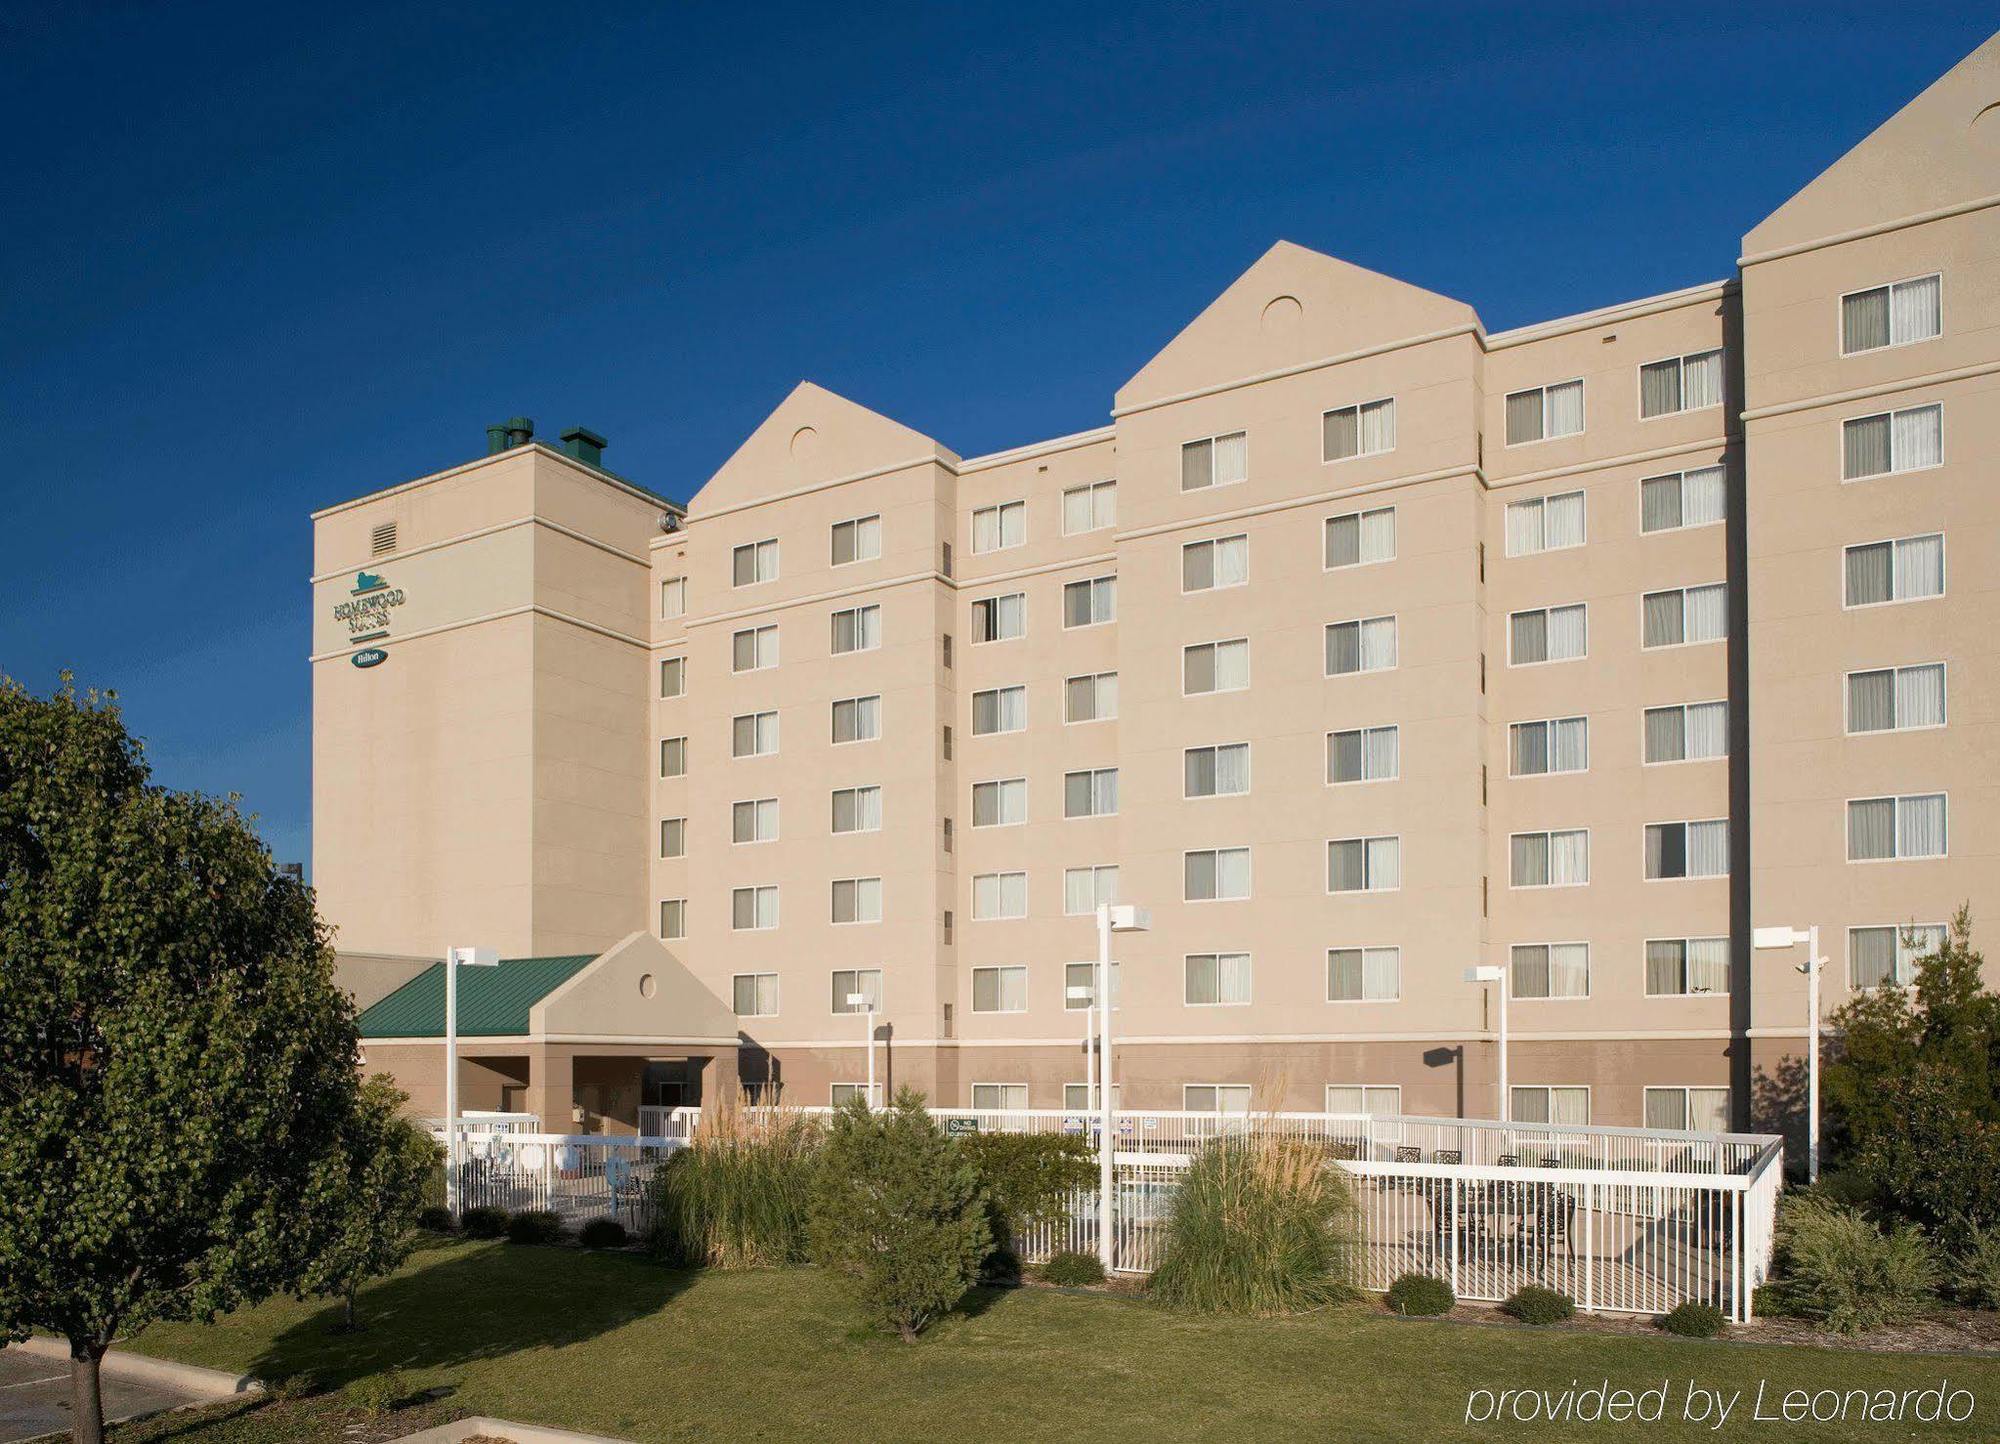 HOTEL HOMEWOOD SUITES BY HILTON FT. WORTH-NORTH AT FOSSIL CREEK FORT WORTH,  TX 3* (United States) - from £ 70 | HOTELMIX